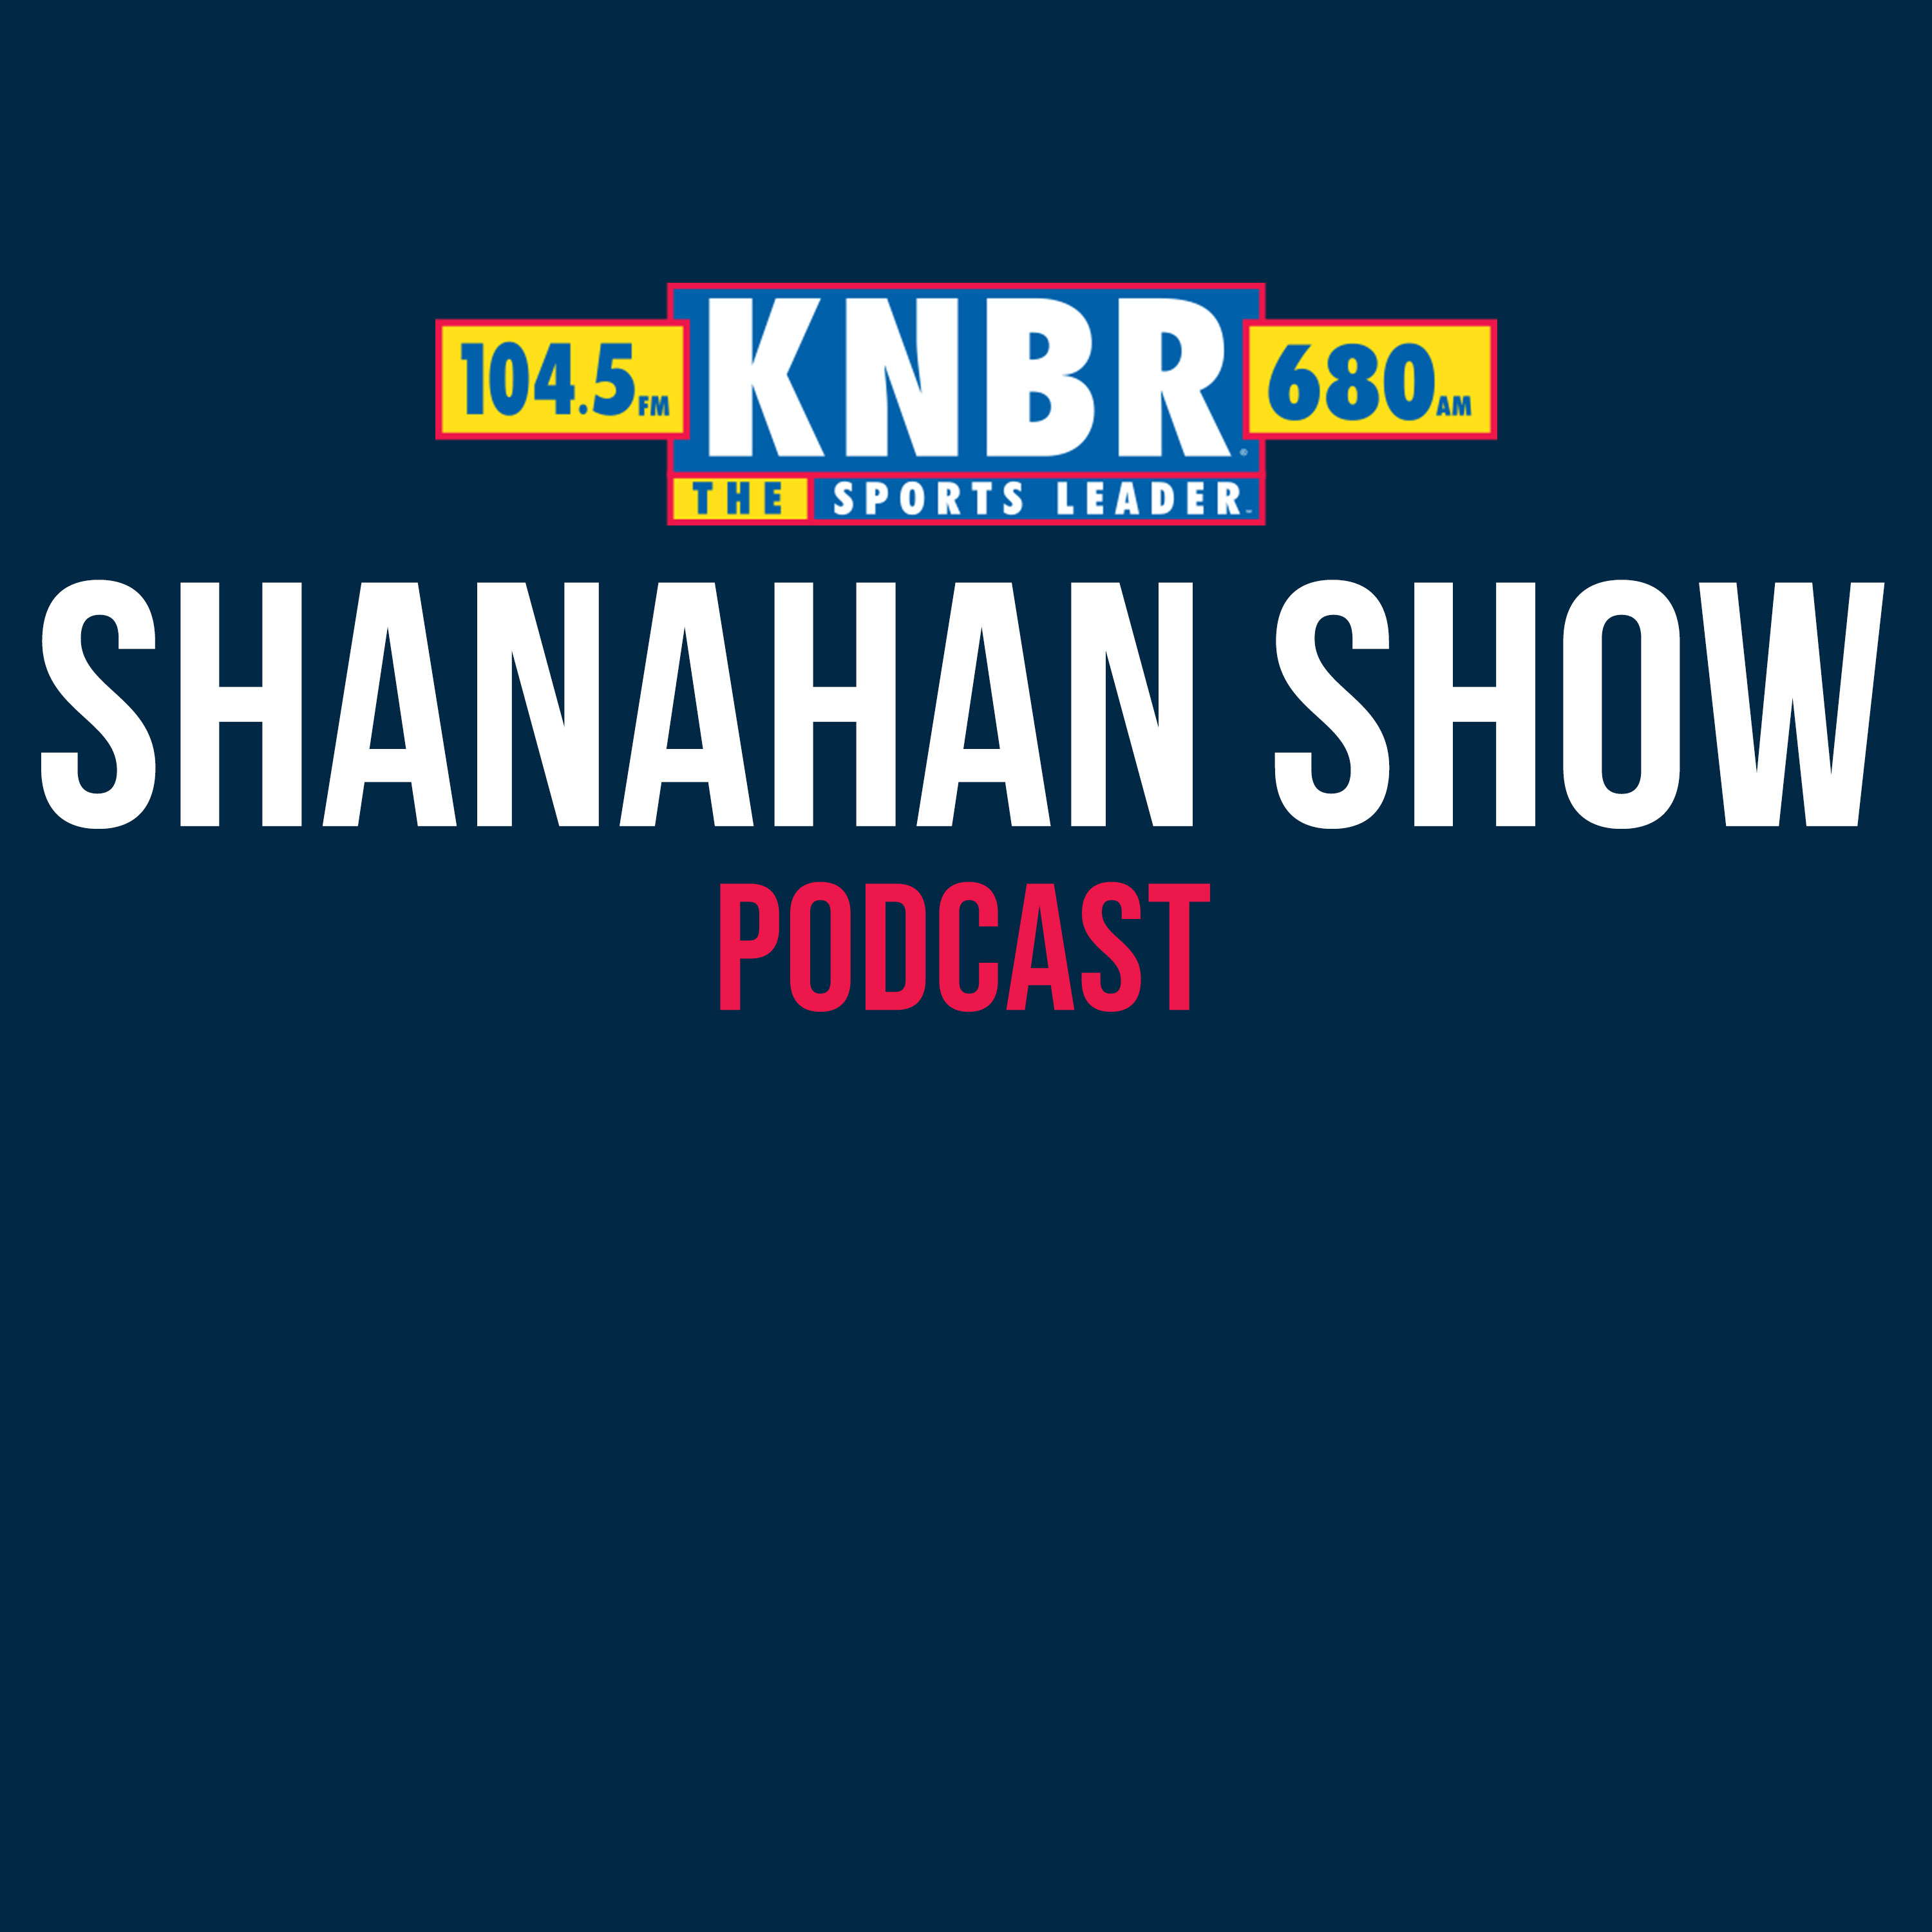 12-29 Kyle Shanahan joins Adam Copeland to discuss how the 49ers rebound from the Ravens loss to Sunday's game vs Washington